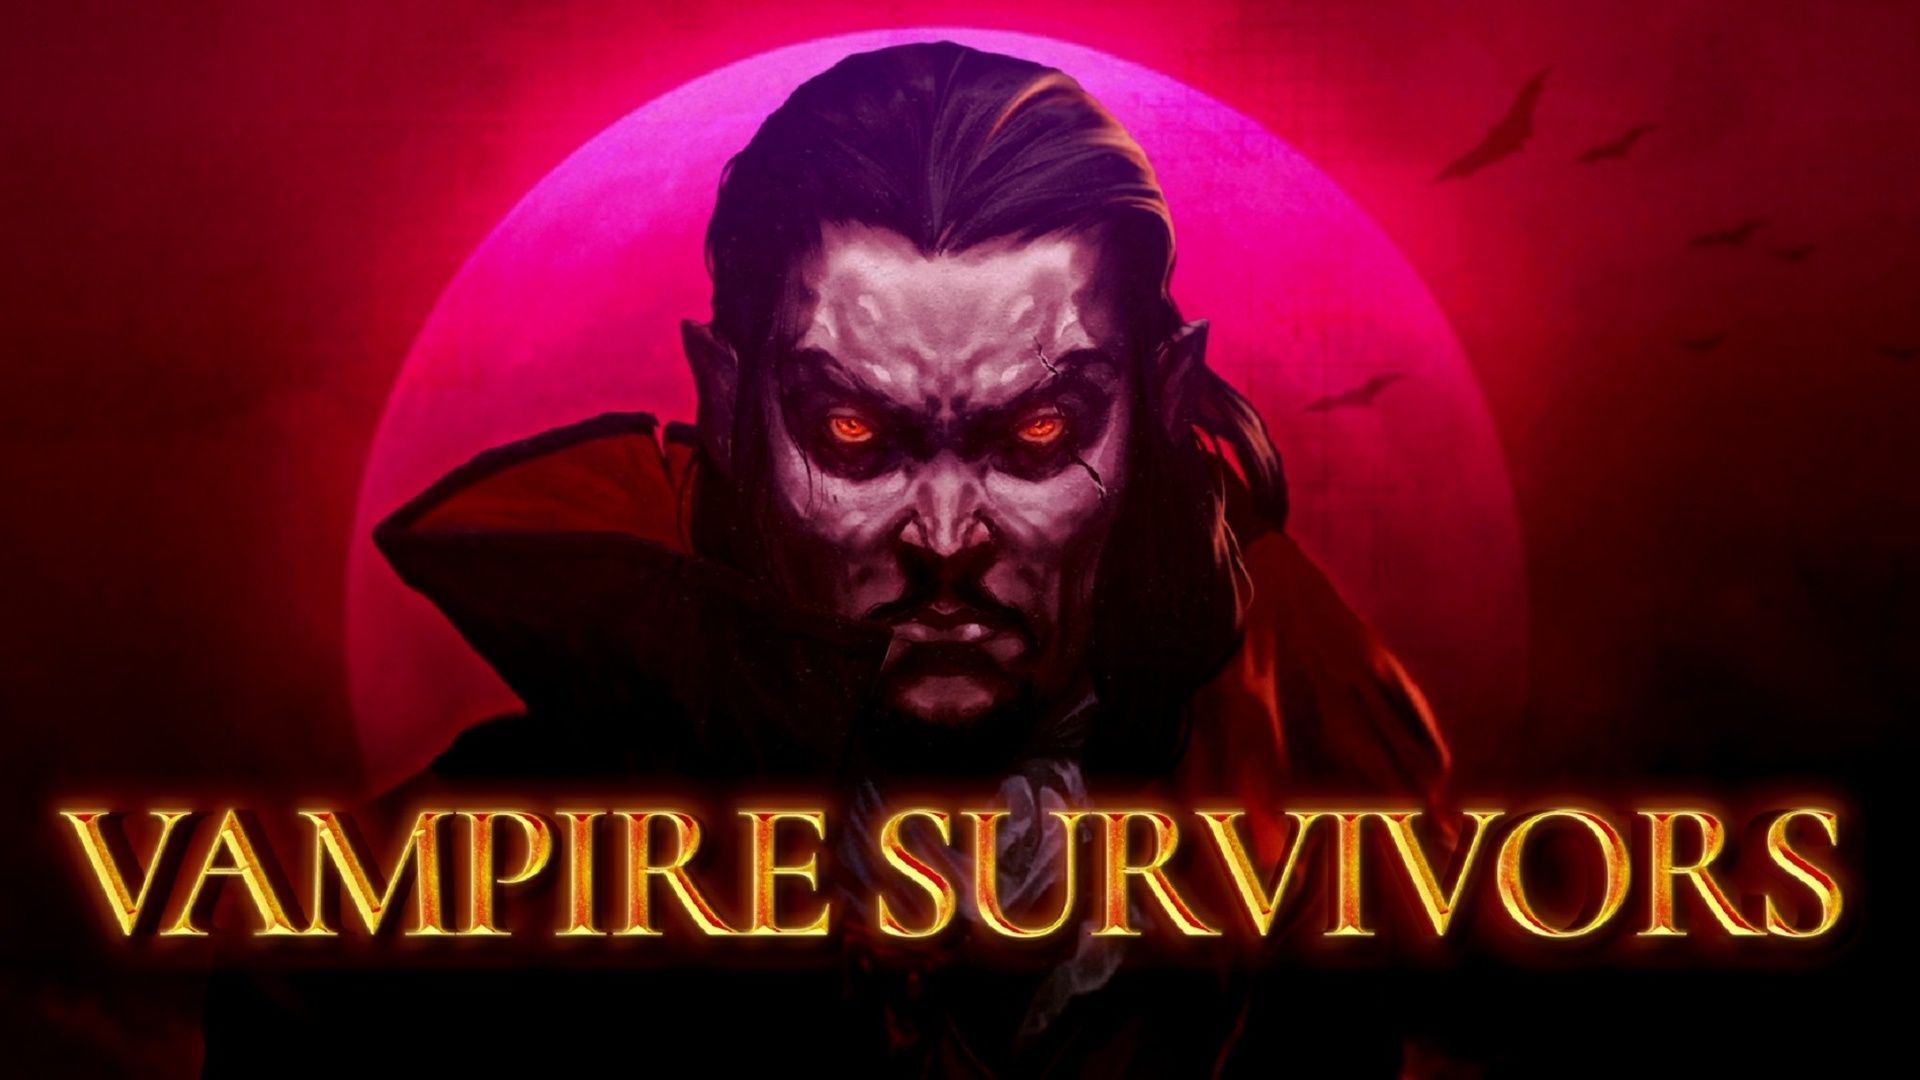 Vampire Survivors: Tides of the Foscari - How To Evolve All New